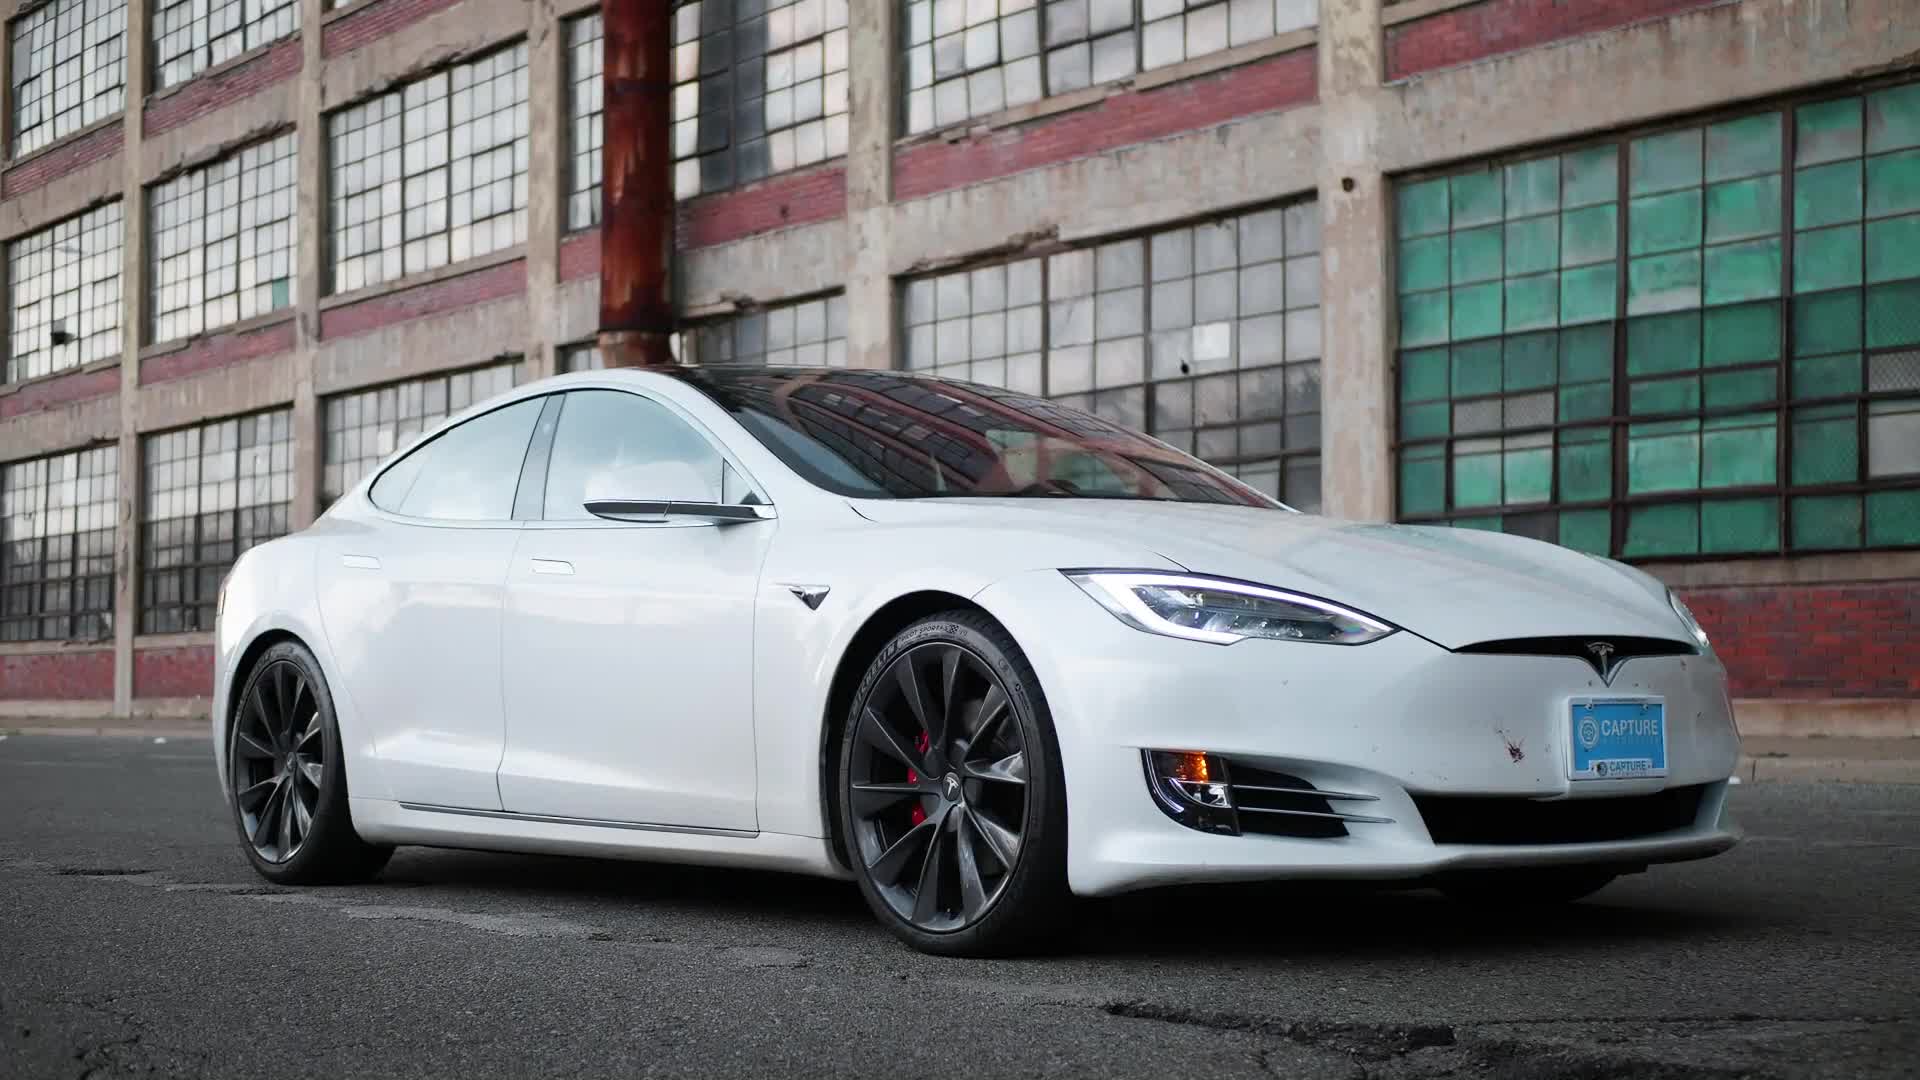 Game Over: Tesla's Latest Update Removes Steam Gaming from Model S and X, Surprising Fans